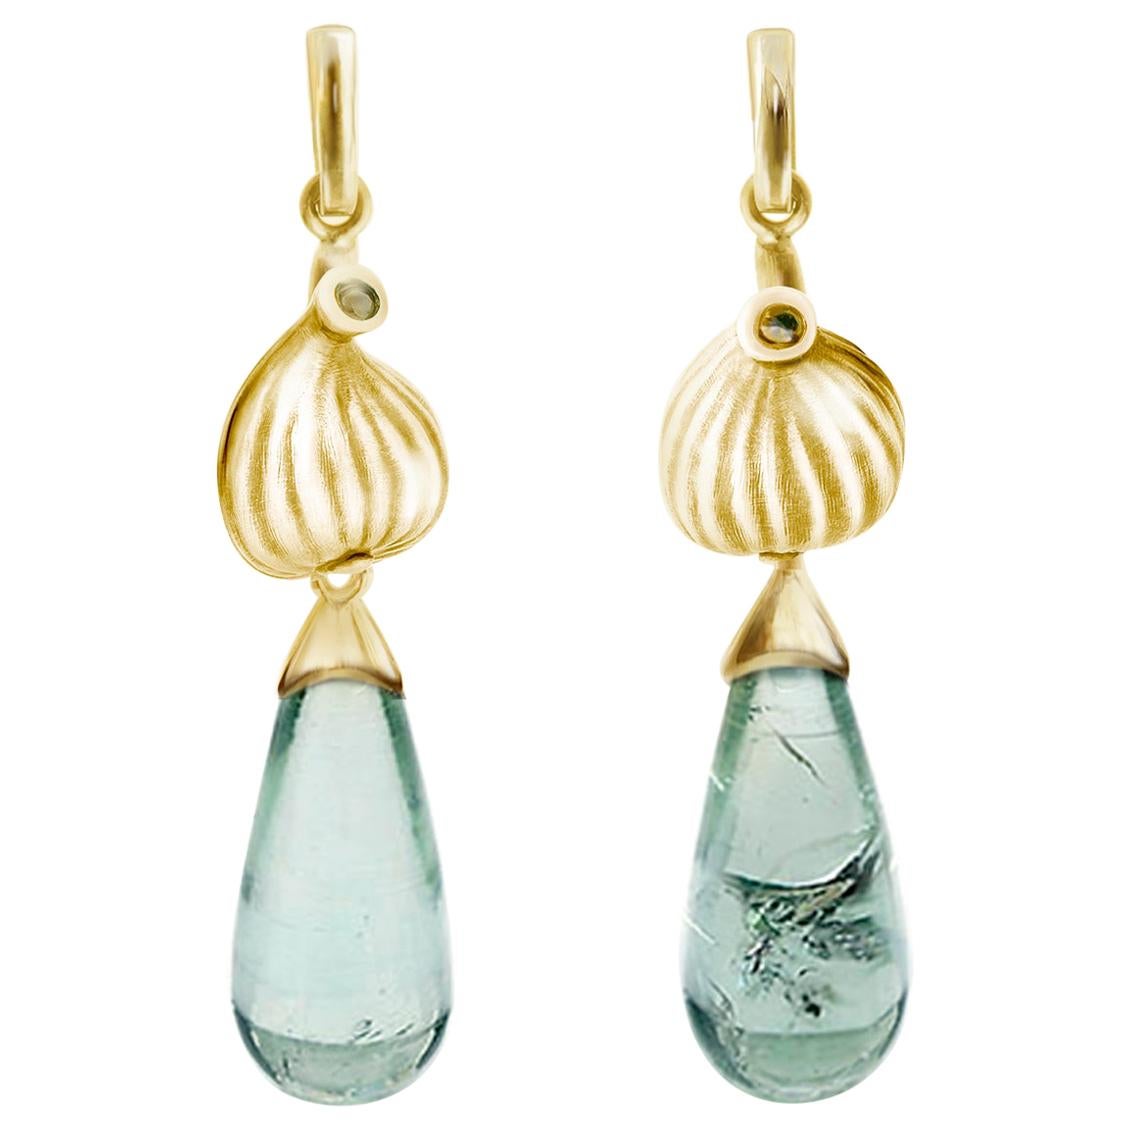 Yellow Gold Contemporary Earrings with Blue Tourmalines and Diamonds